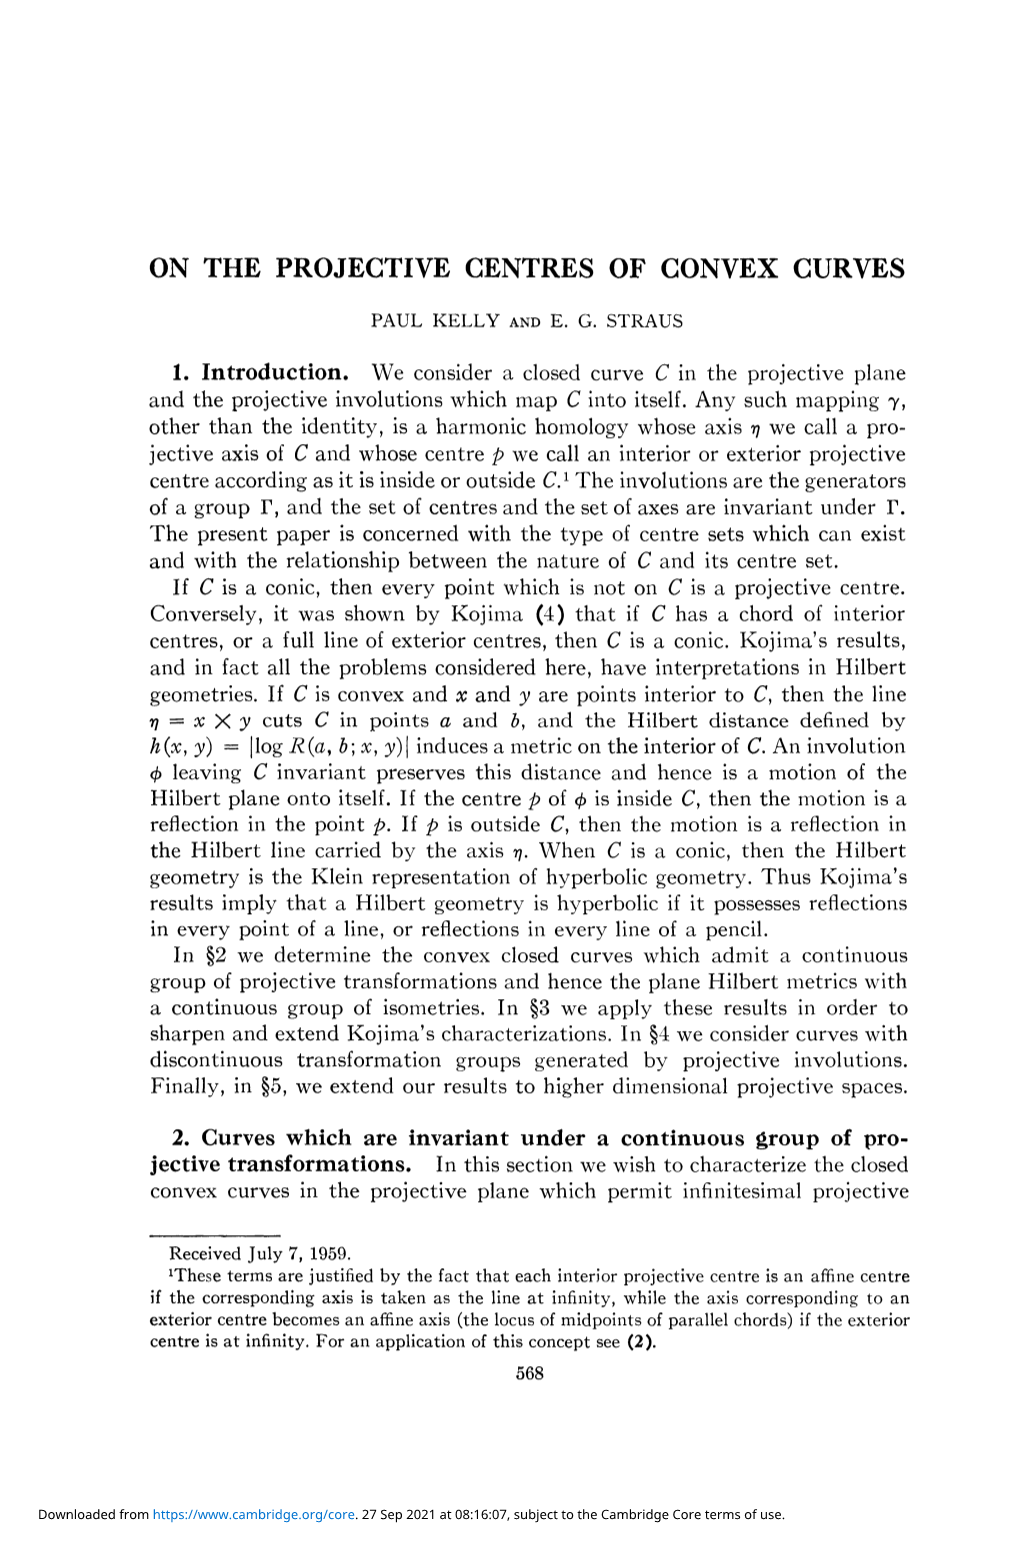 On the Projective Centres of Convex Curves